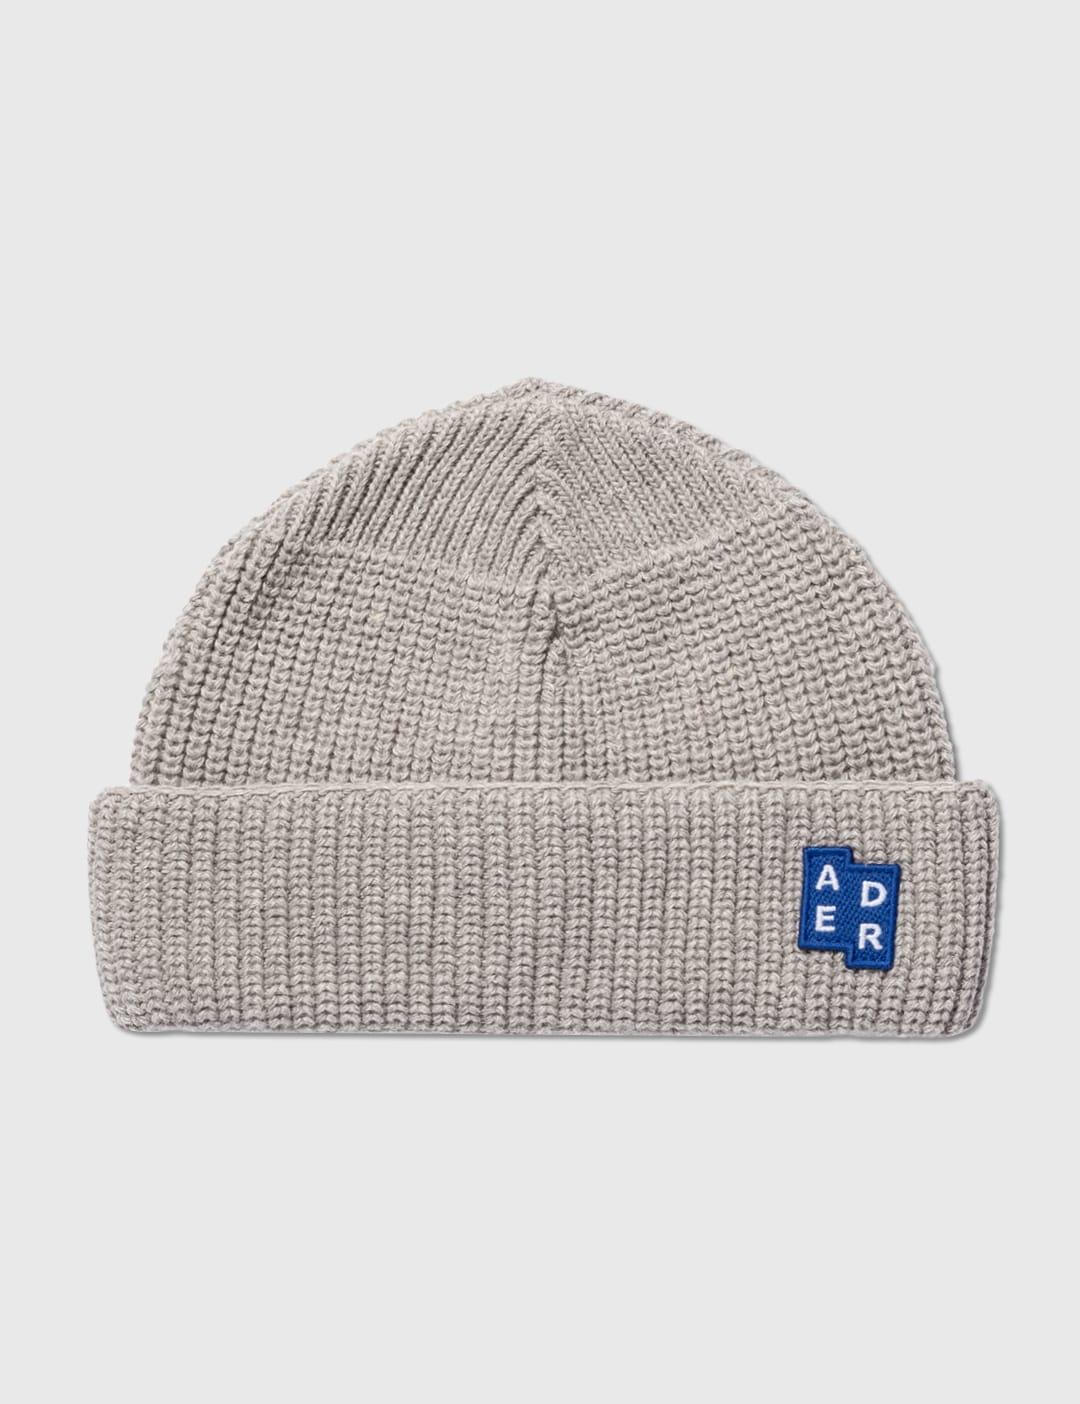 Ader Error - LOGO BEANIE | HBX - Globally Curated Fashion and 